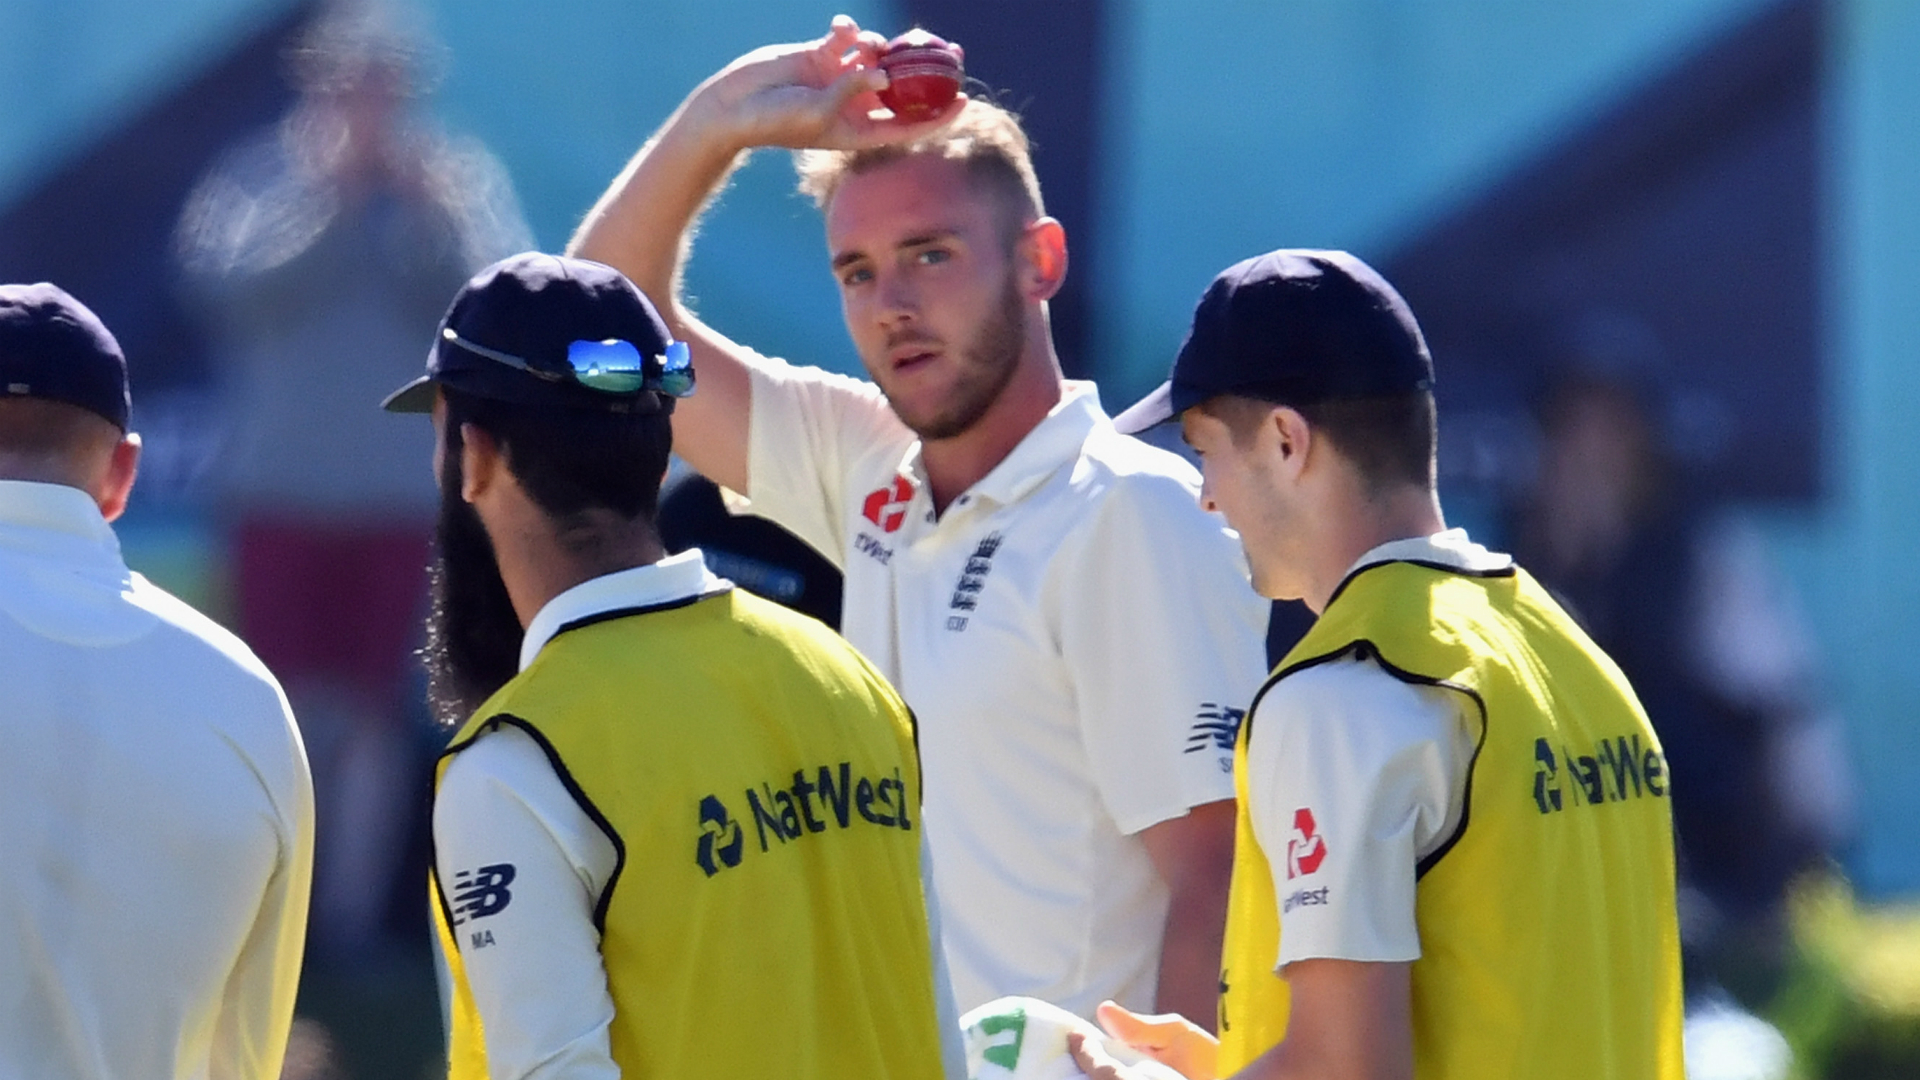 Stuart Broad, Mark Stoneman and James Vincent impressed as England reached 202-3 at stumps on day three of the second Test on Sunday.